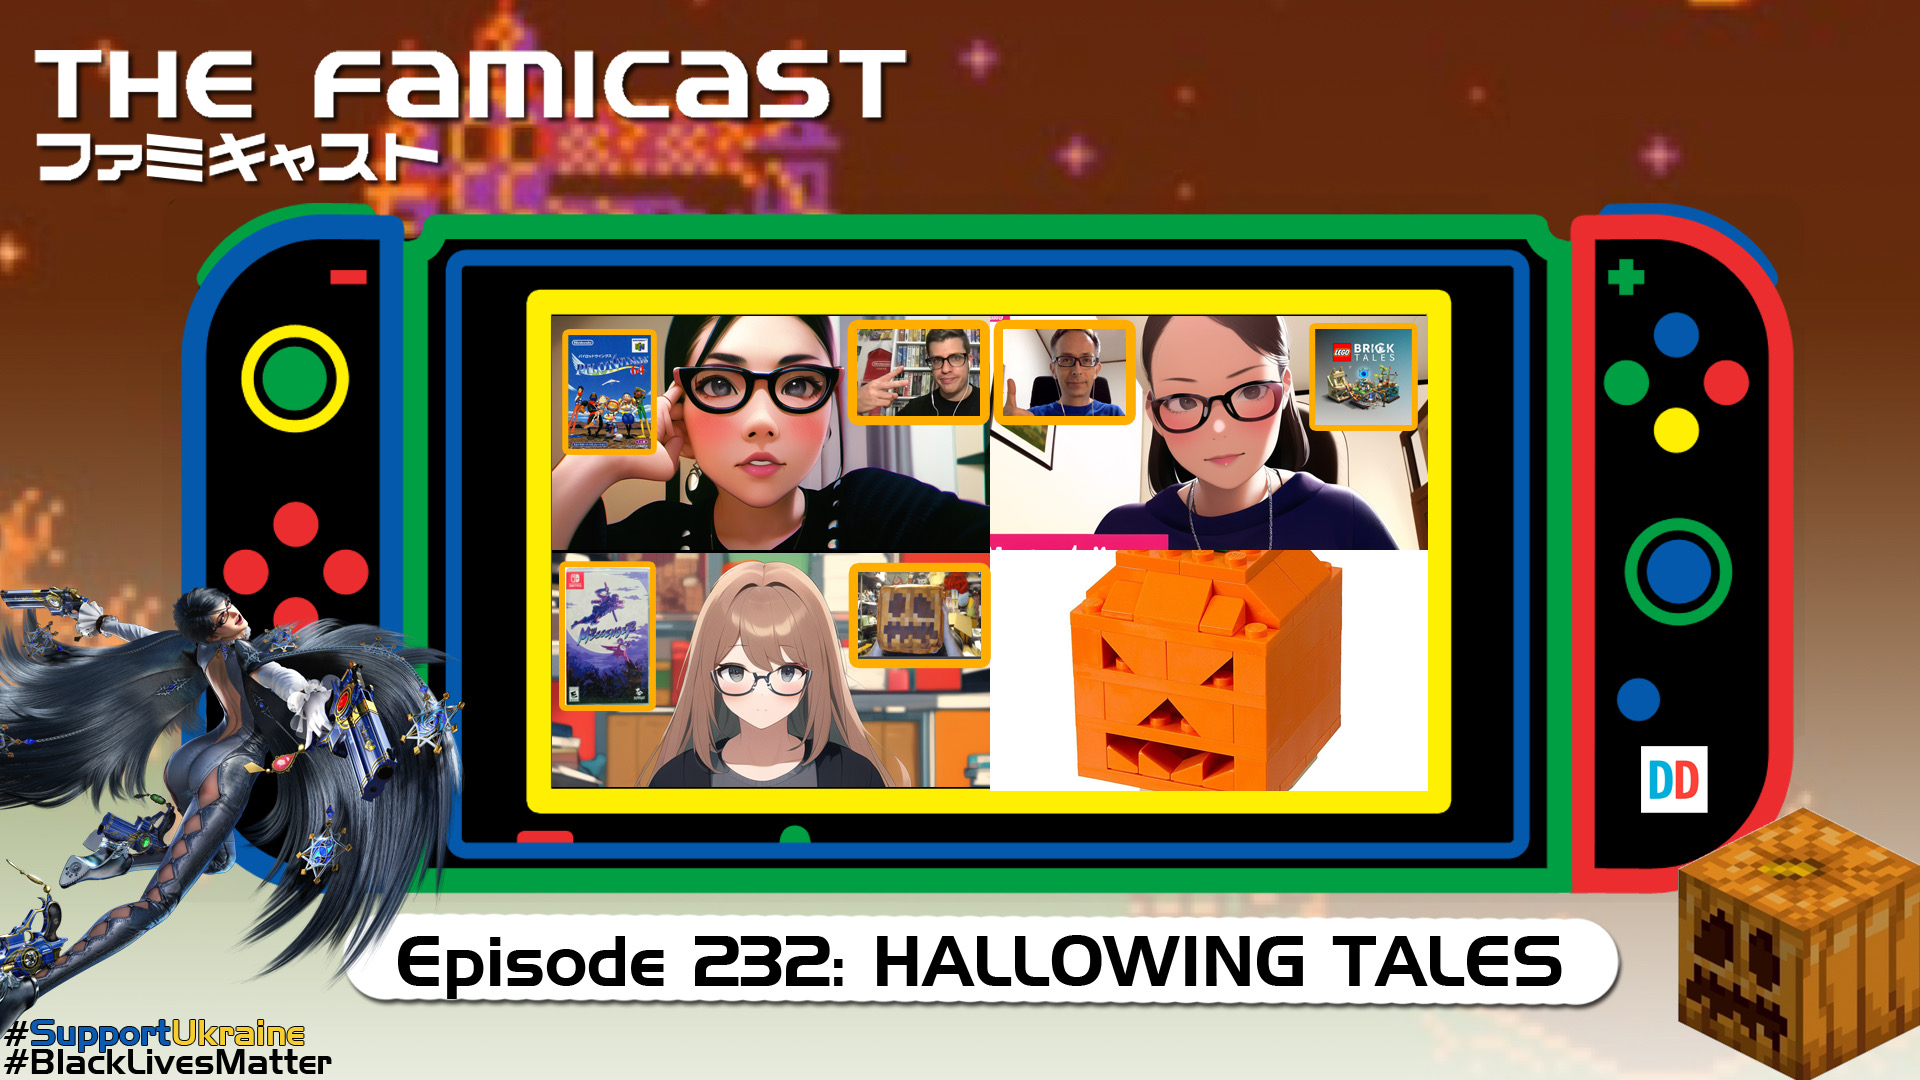 The Famicast 232 - HALLOWING TALES